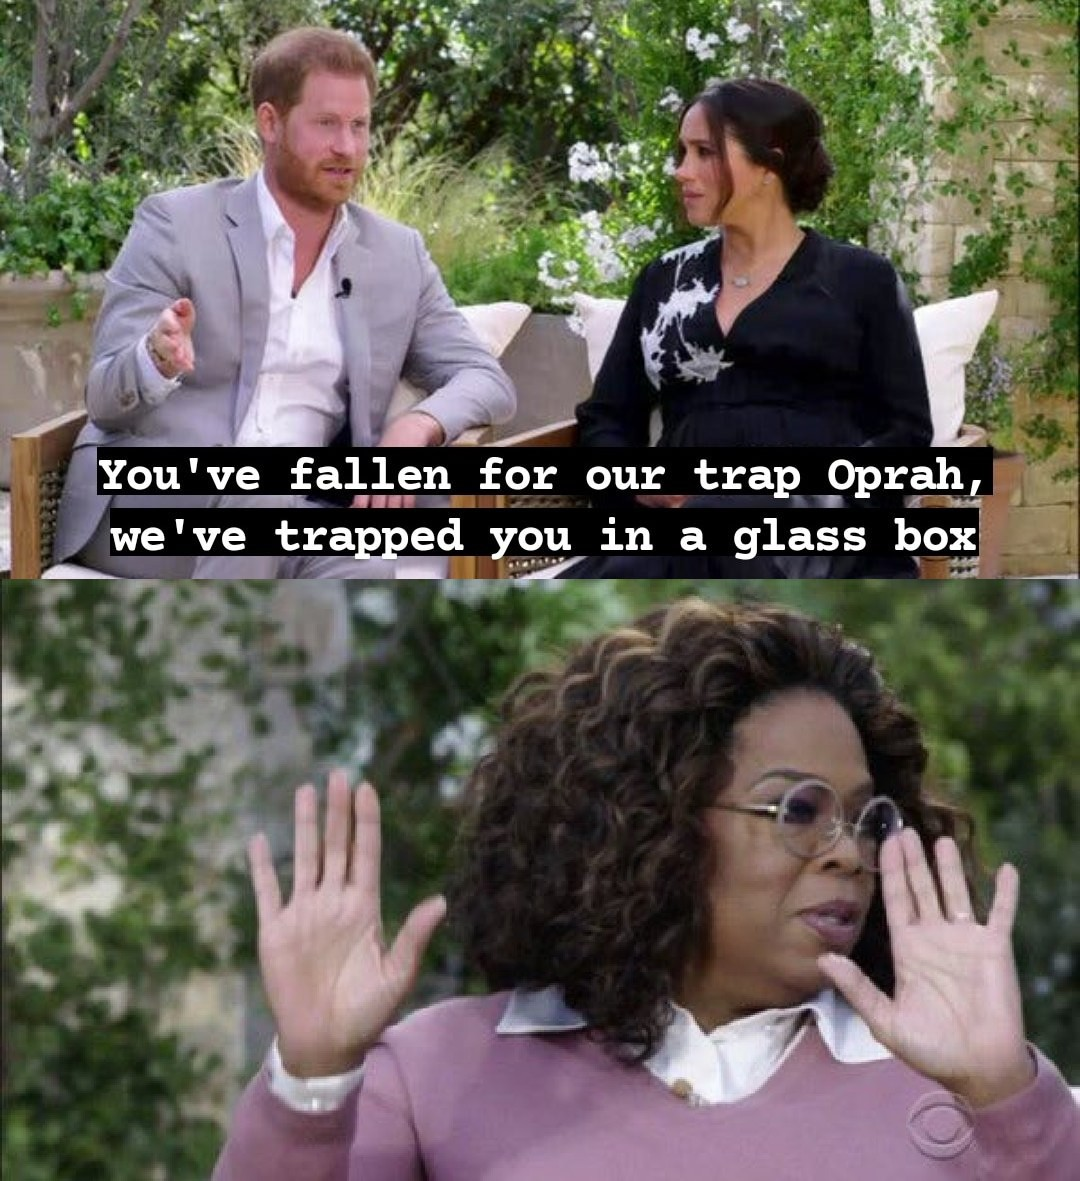 You've fallen for our trap, Oprah